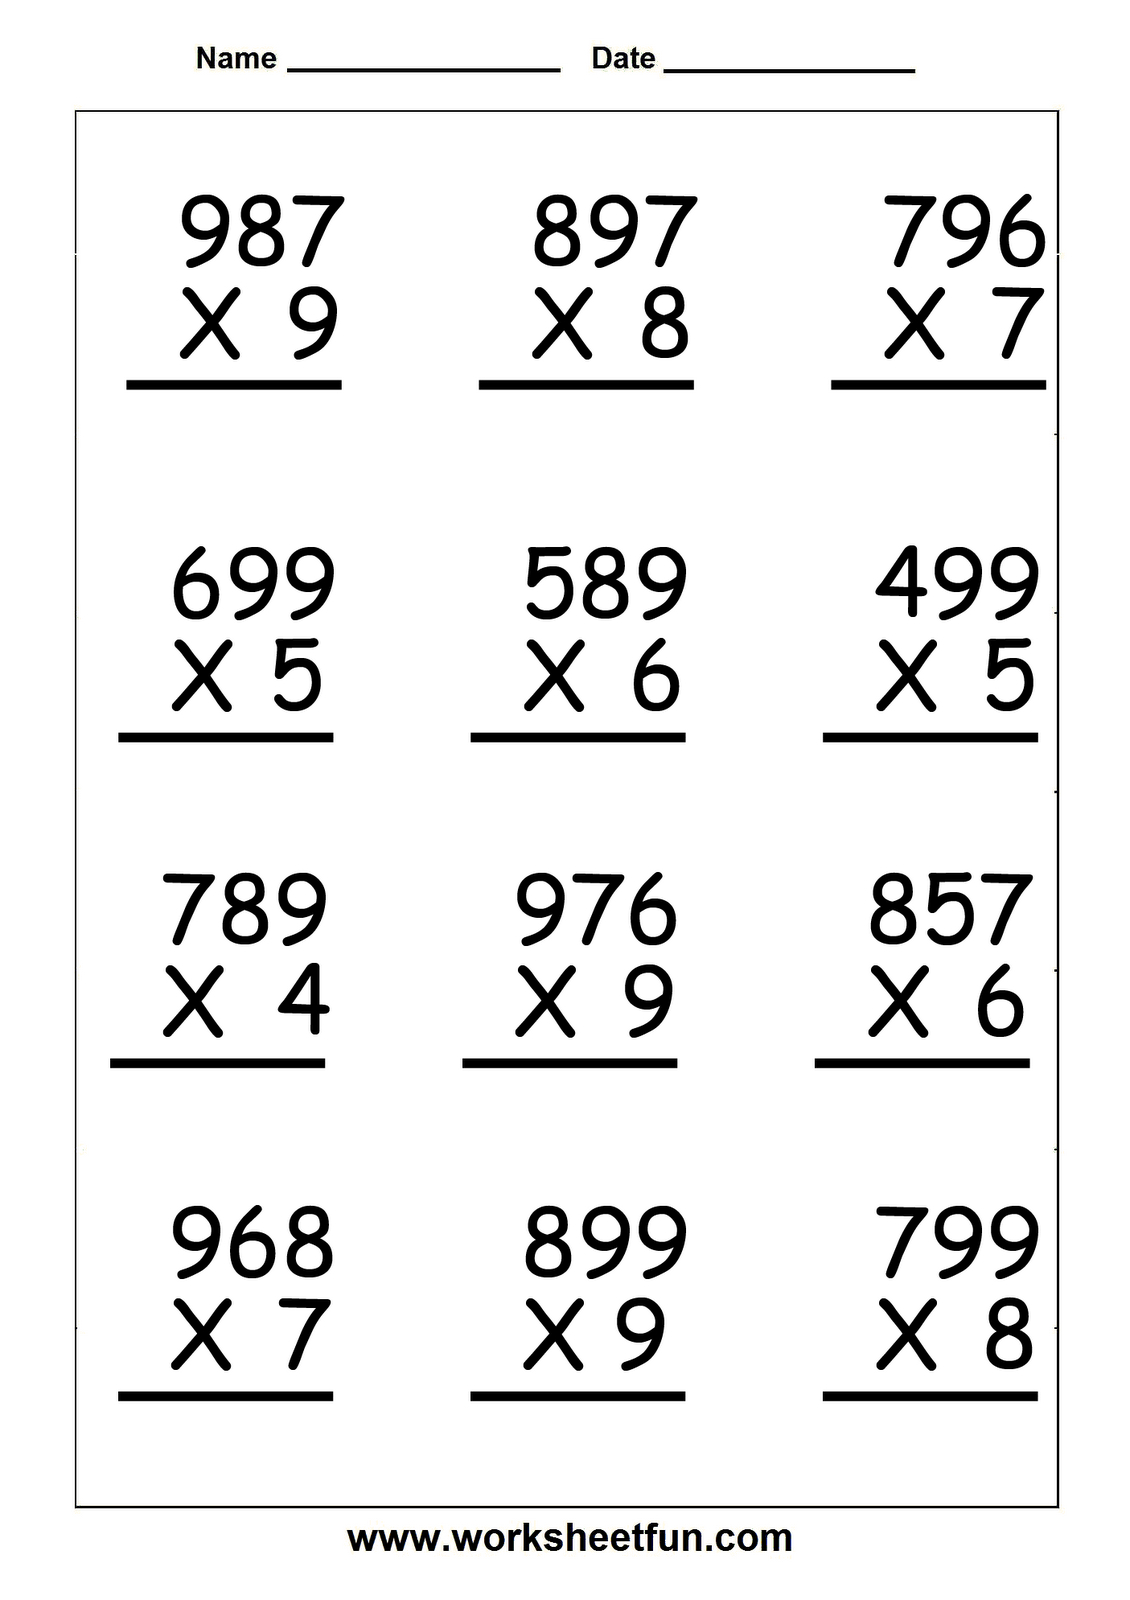 Multiplication Worksheets For 5Th Grade | Worksheetfun with regard to Printable Multiplication Sheets For 5Th Graders